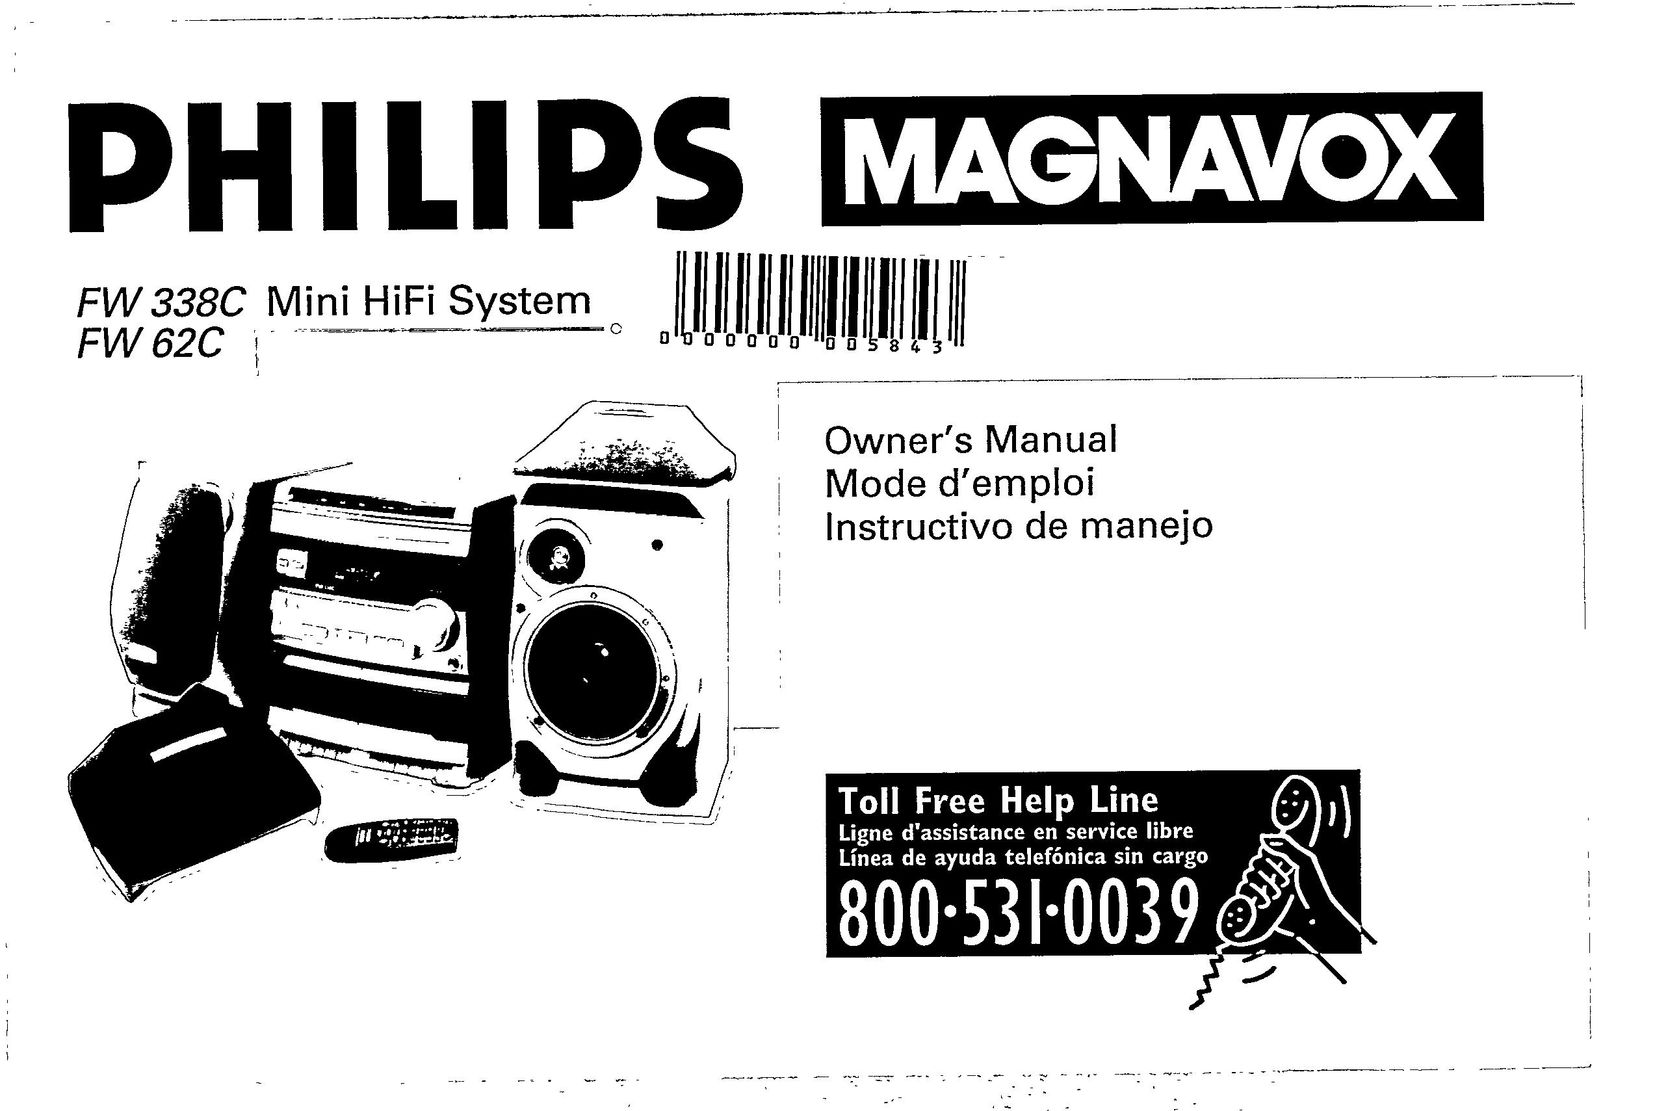 Magnavox FW62C Home Theater System User Manual